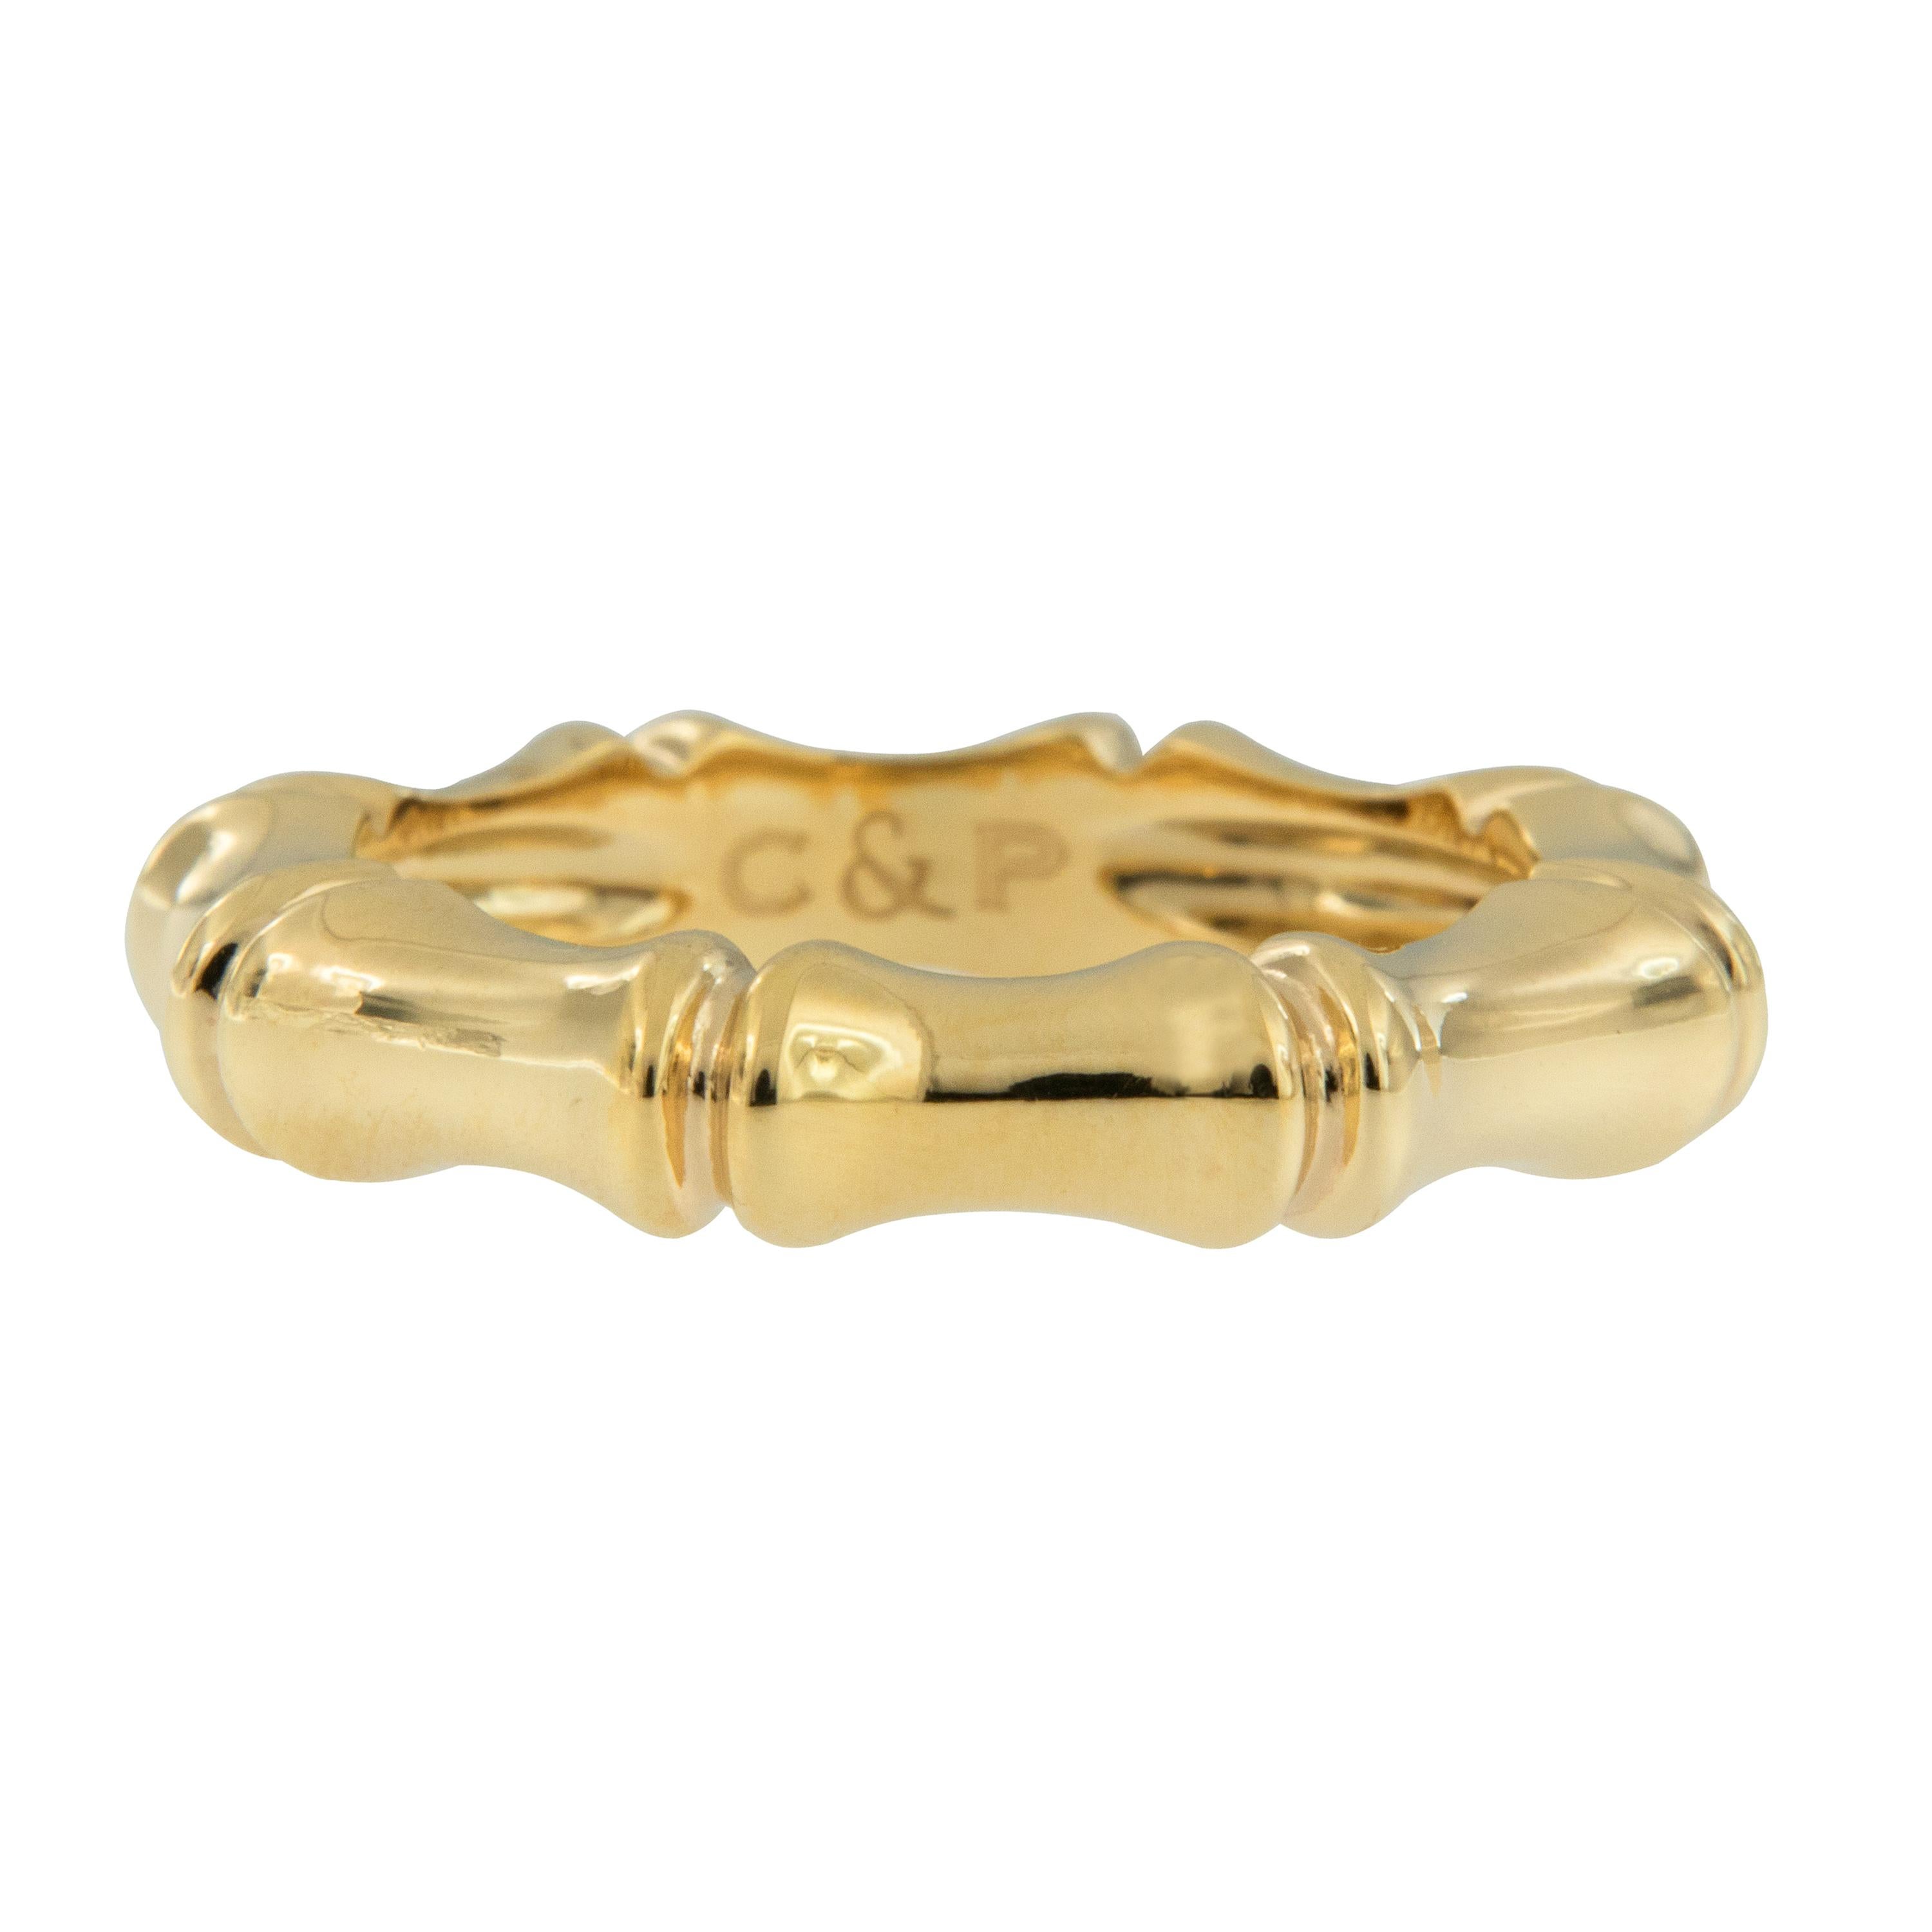 In Chinese culture, bamboo symbolizes strength, acceptance of the natural flow, continuous growth and openness to wisdom. What better way to be mindful of these attributes than wearing this iconic 18 karat yellow gold bamboo motif ring made in Italy